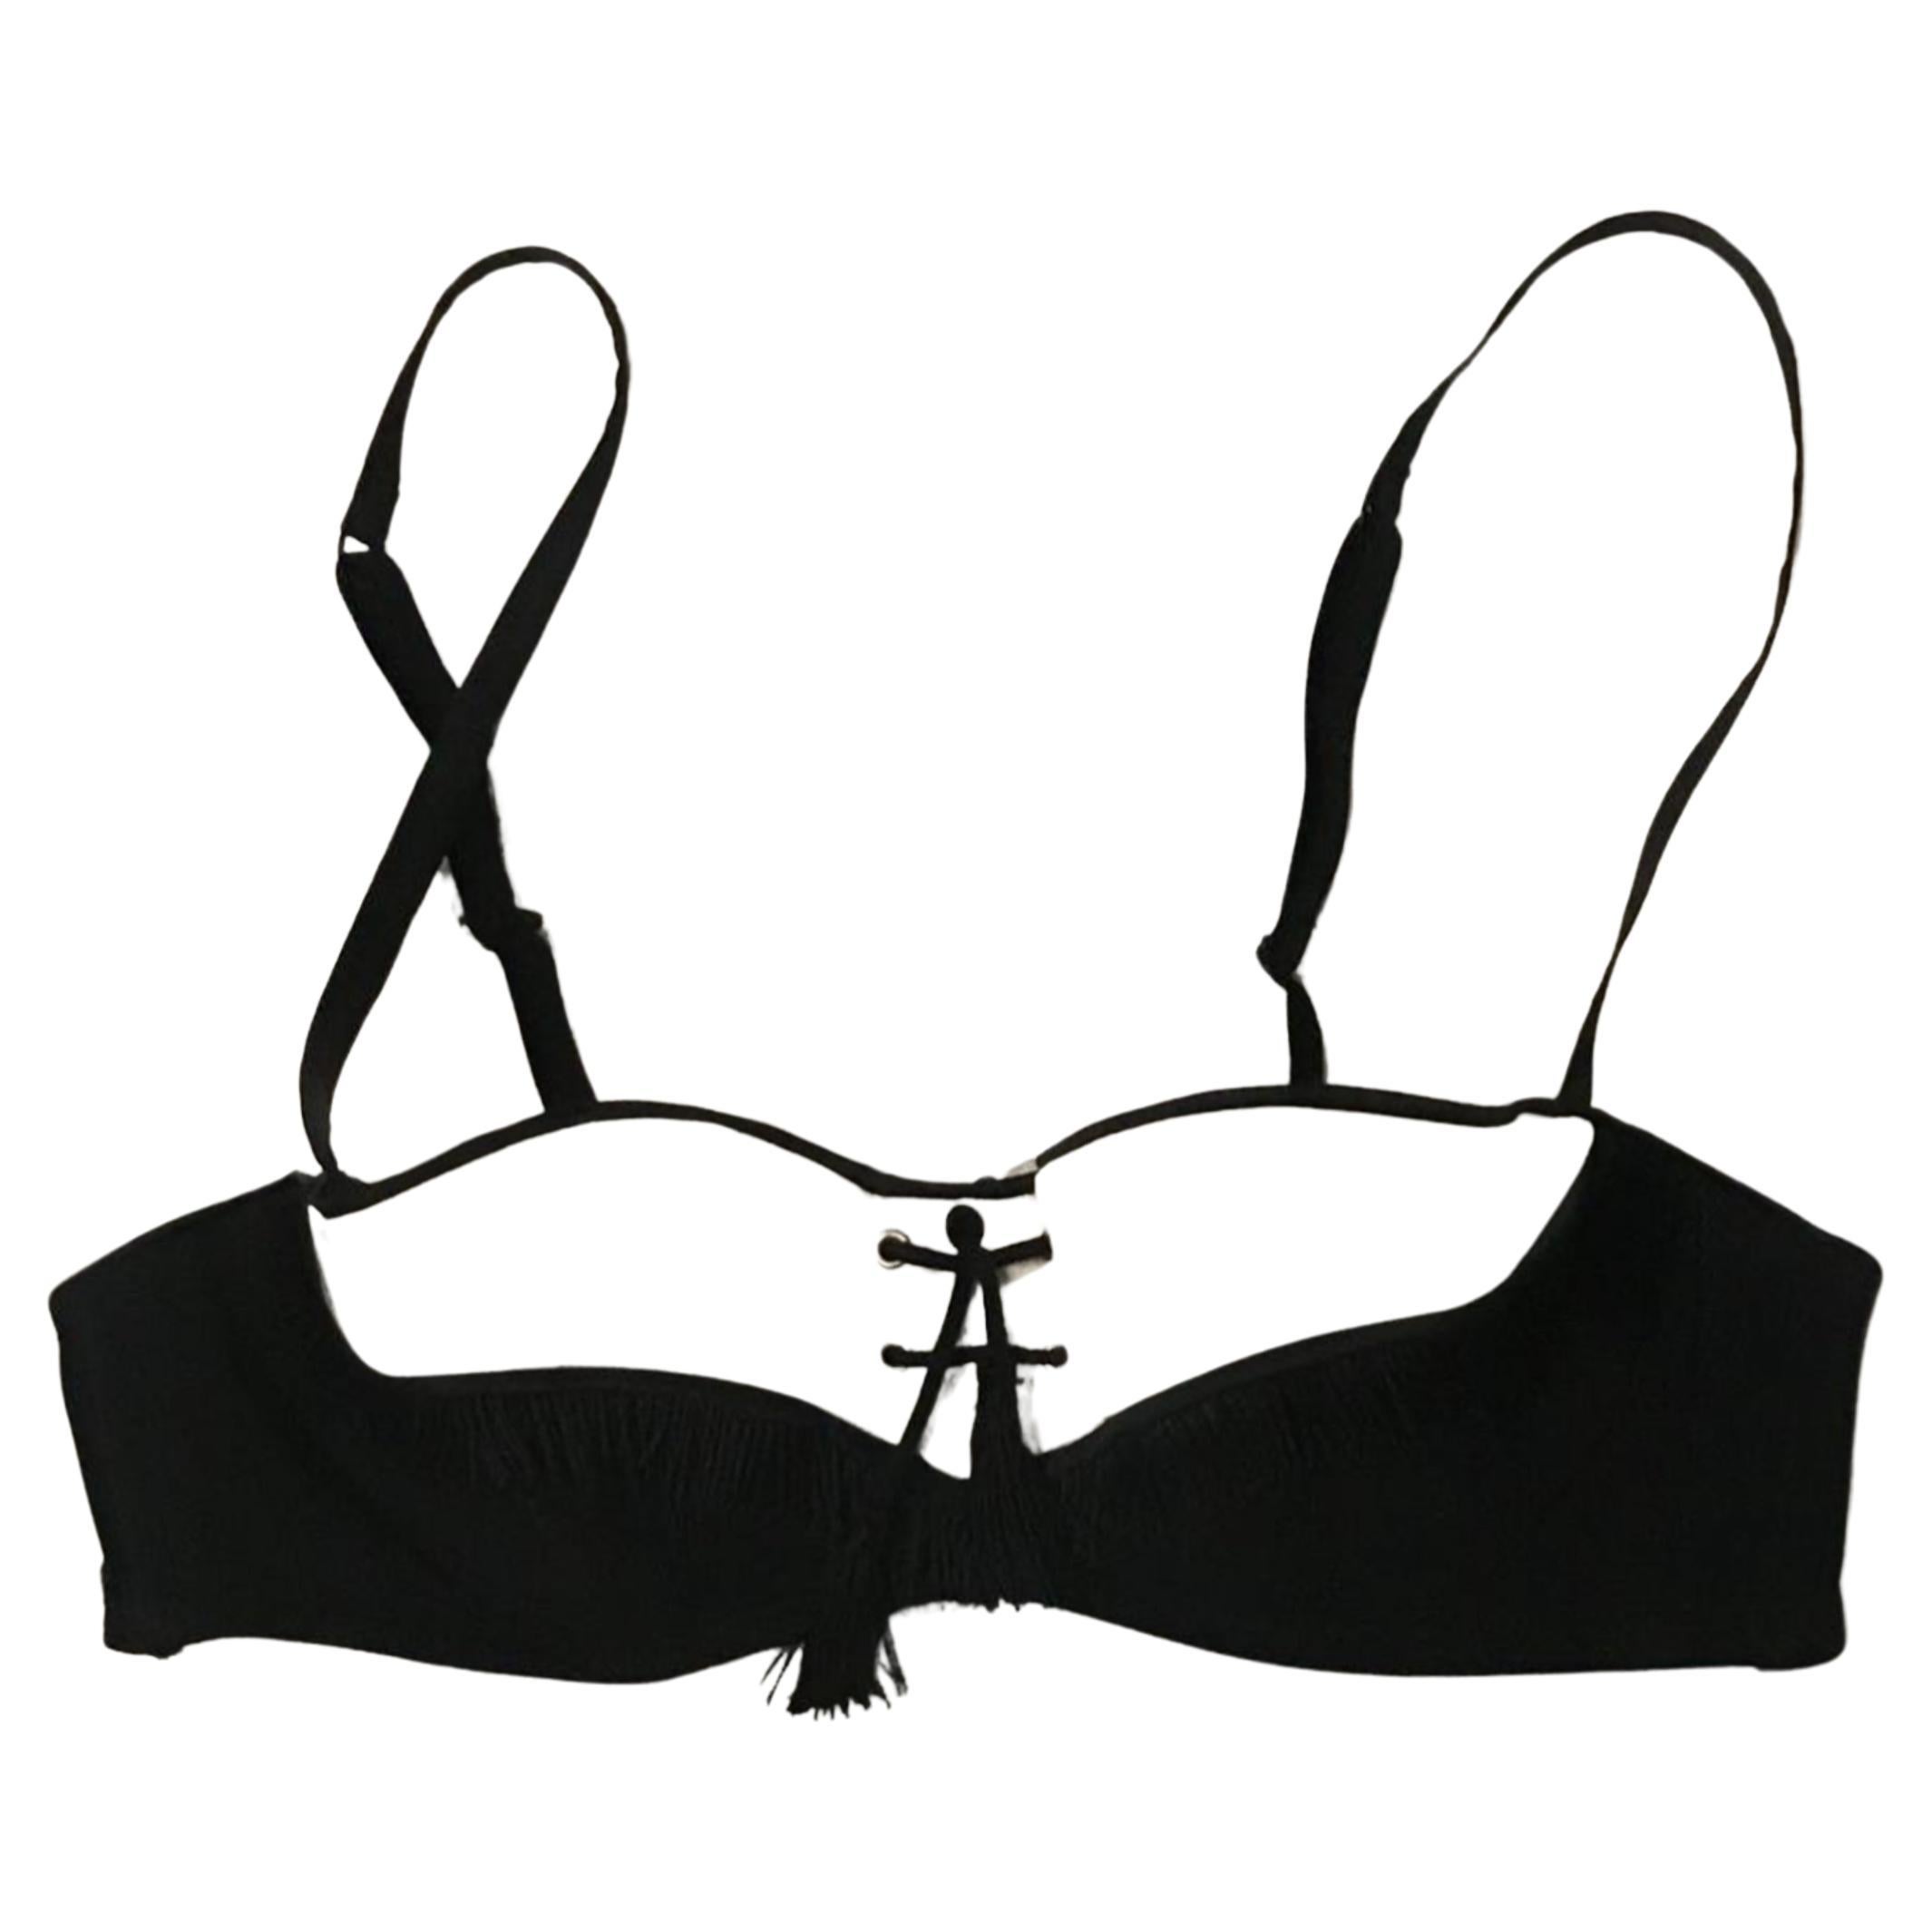 CHANTAL THOMASS Bra Black and white with fringes For Sale